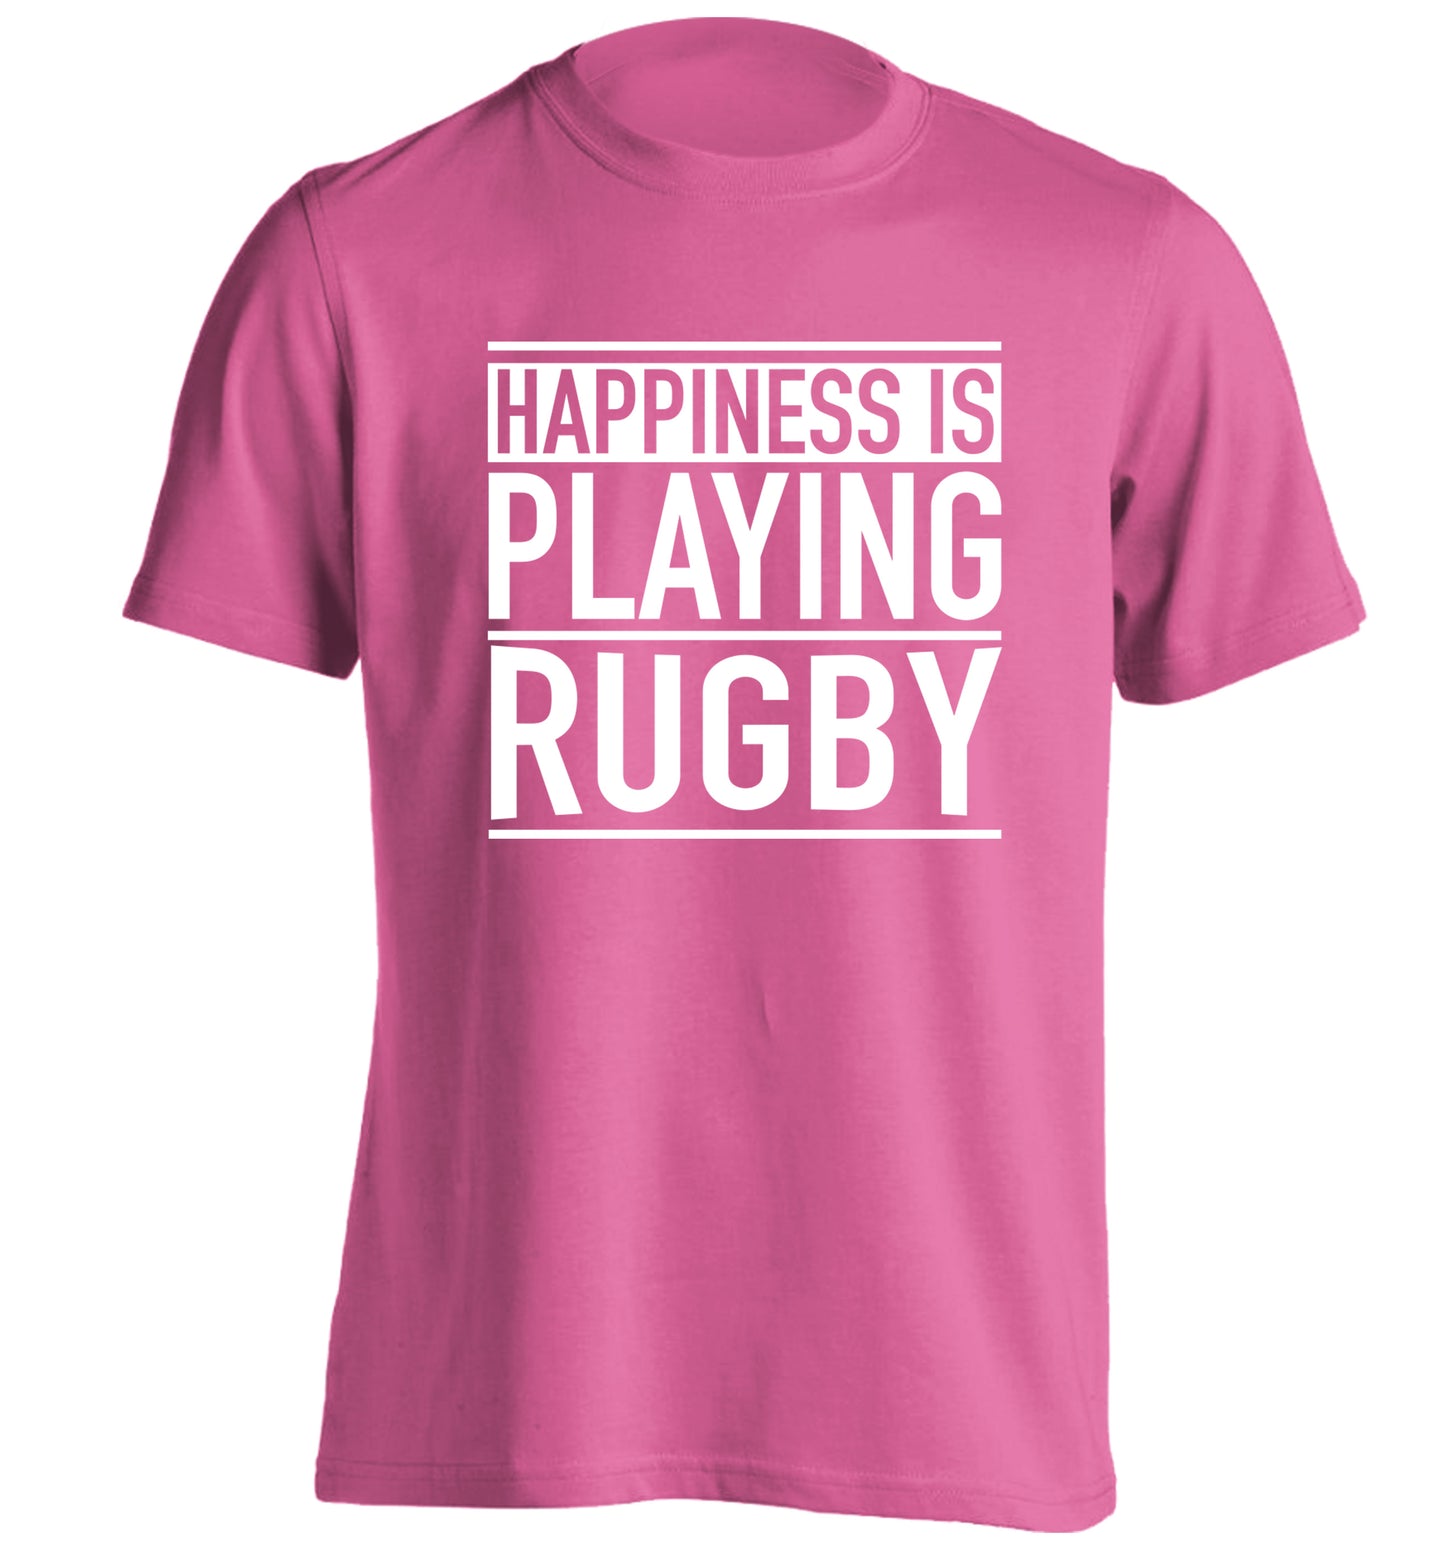 Happiness is playing rugby adults unisex pink Tshirt 2XL